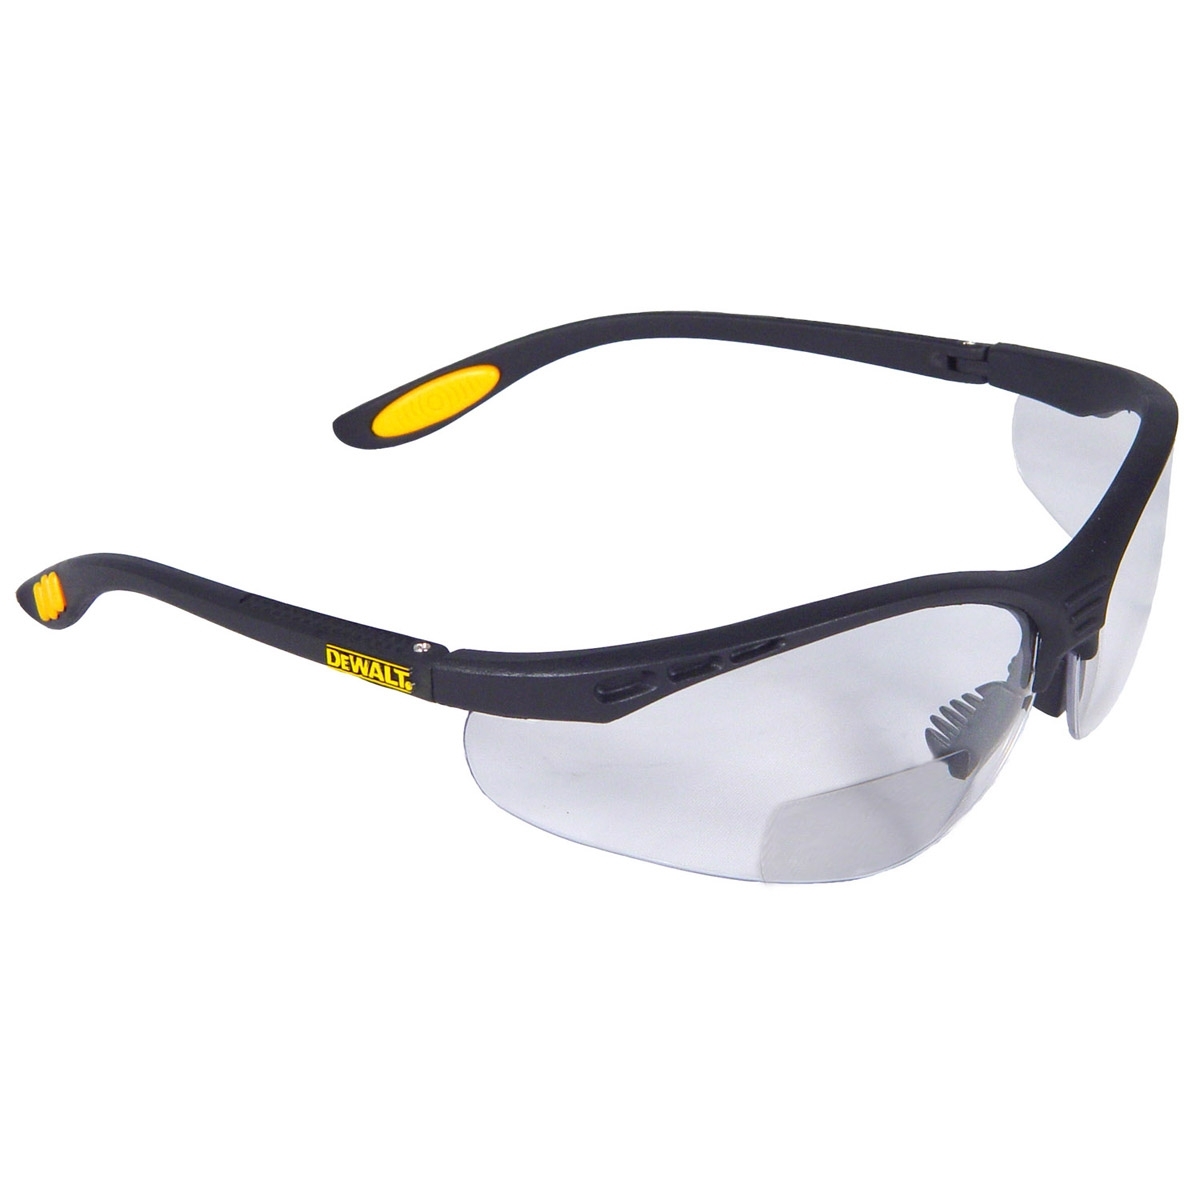 AMBER ELVEX RX-400 BI-FOCAL SAFETY GLASSES 1.5 MAGNIFICATION Eye Protection 